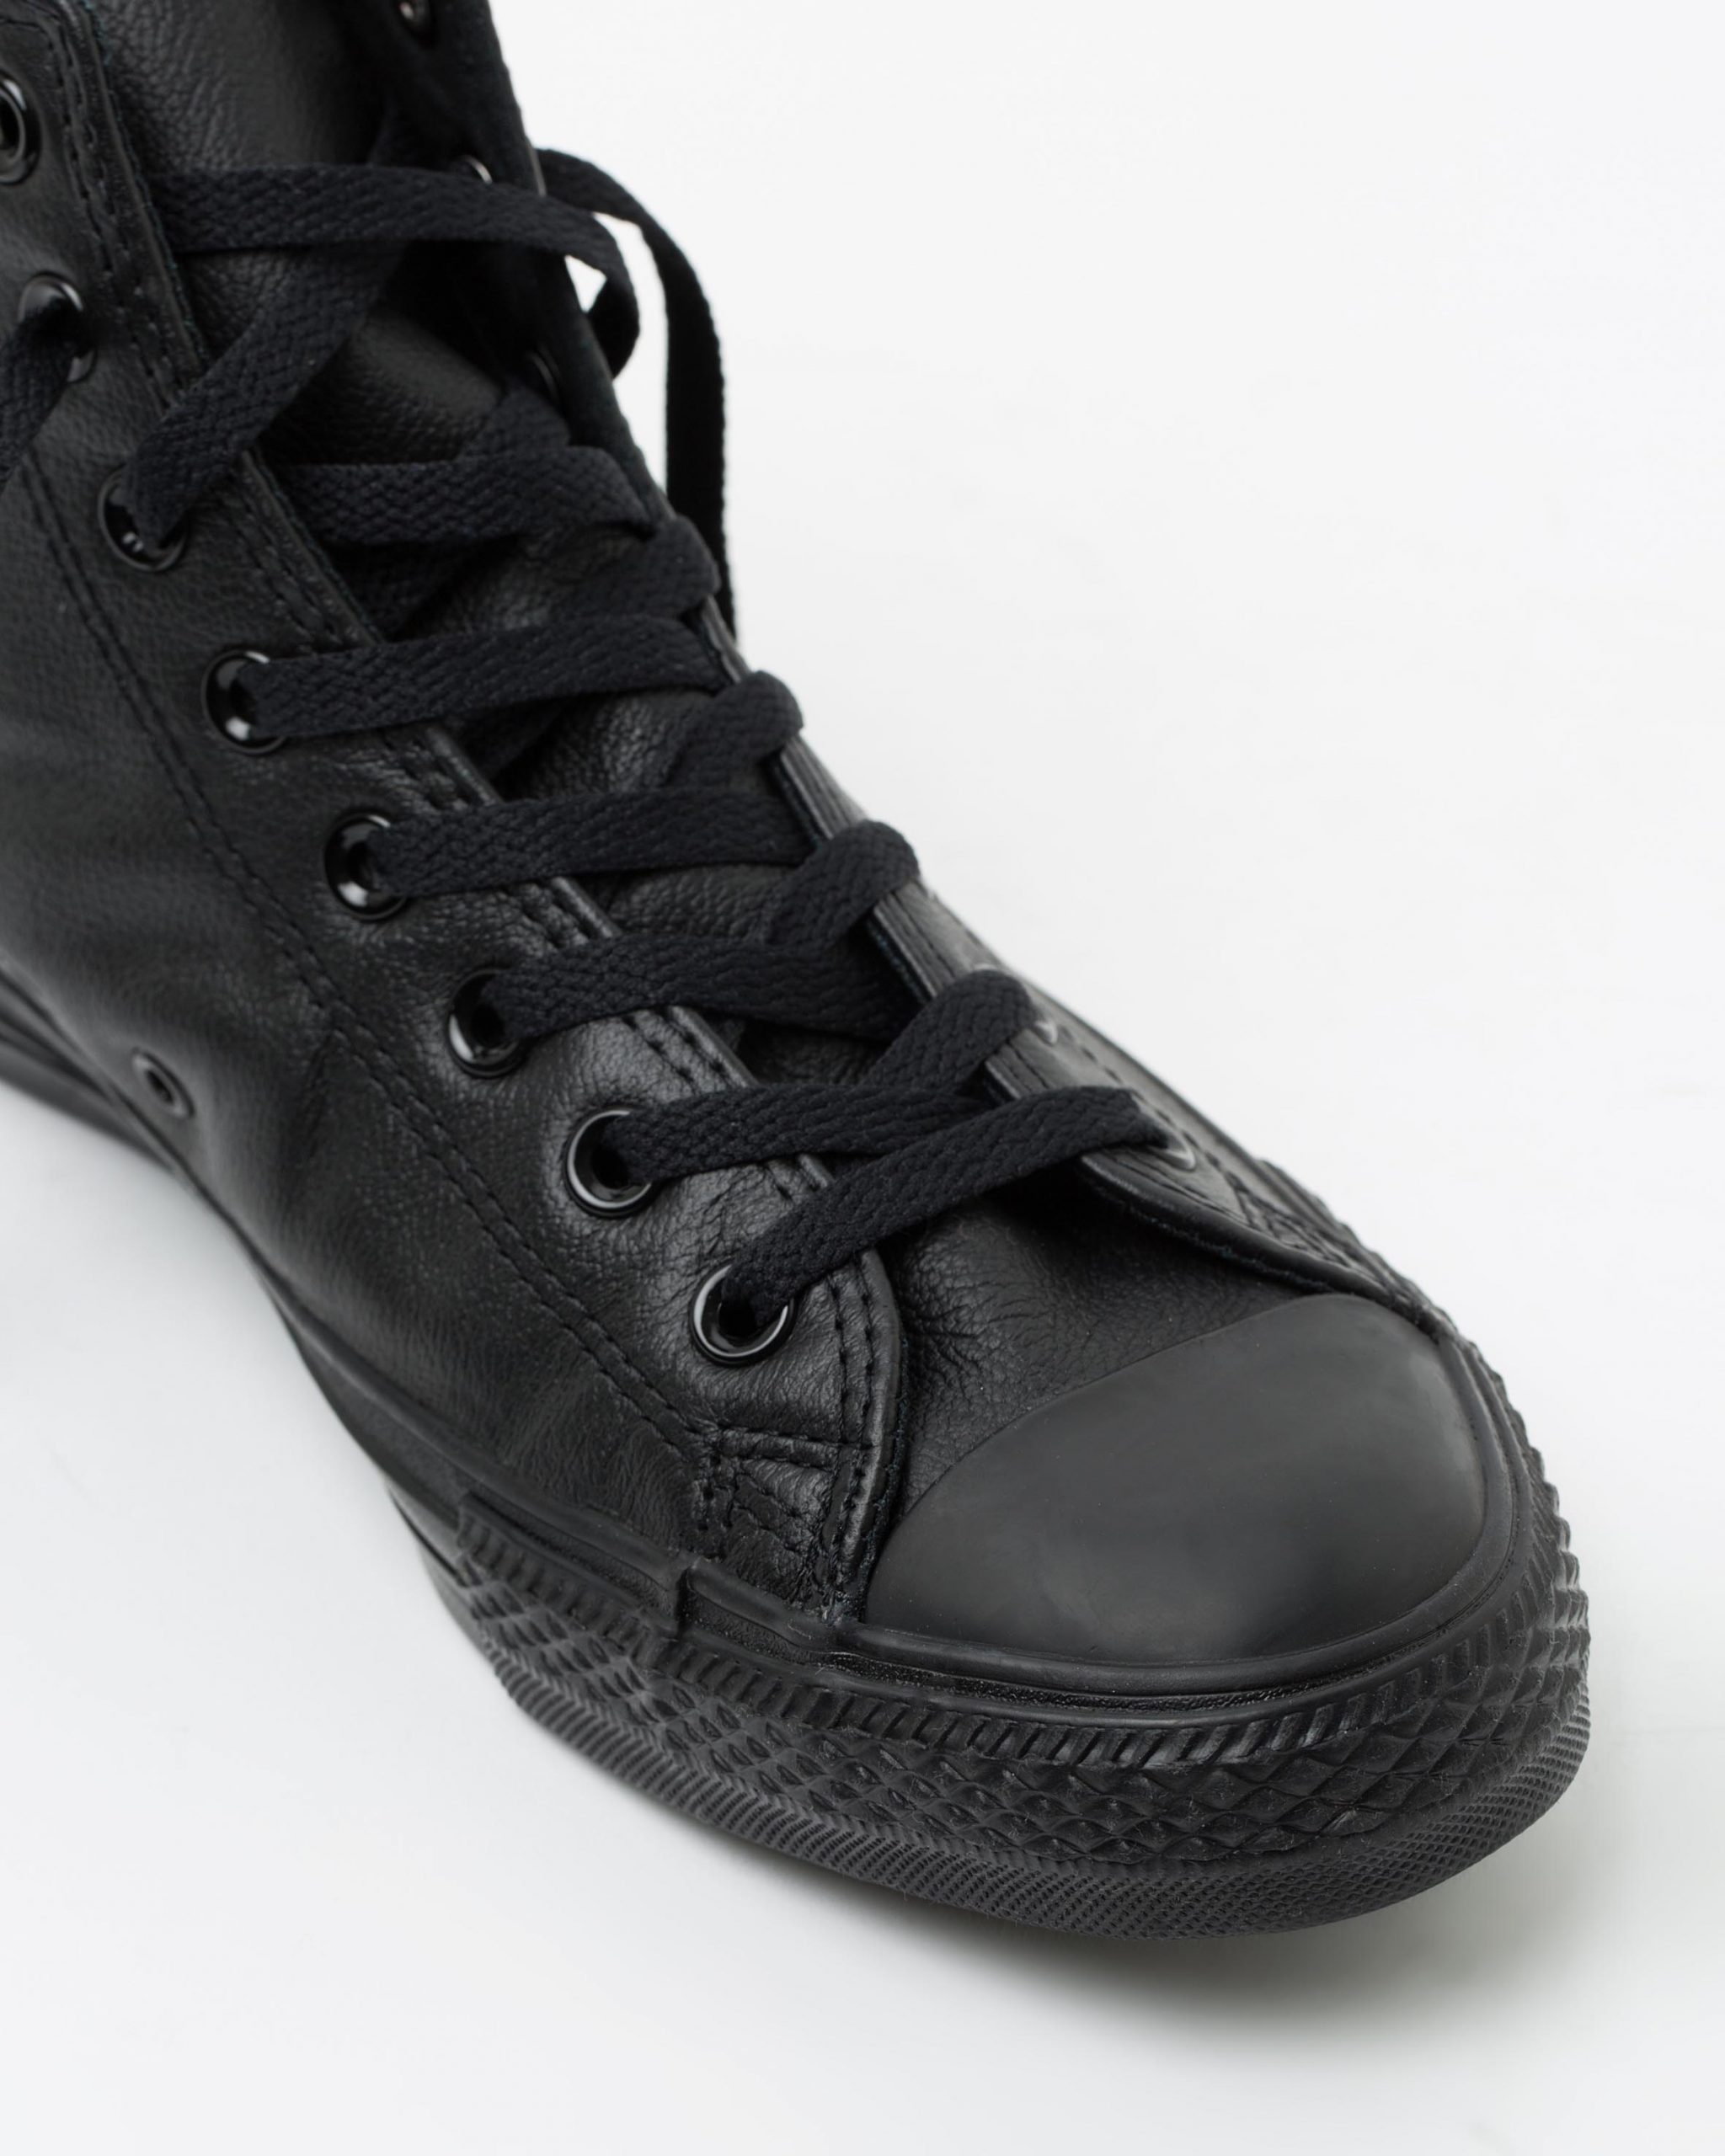 all black leather converse mens